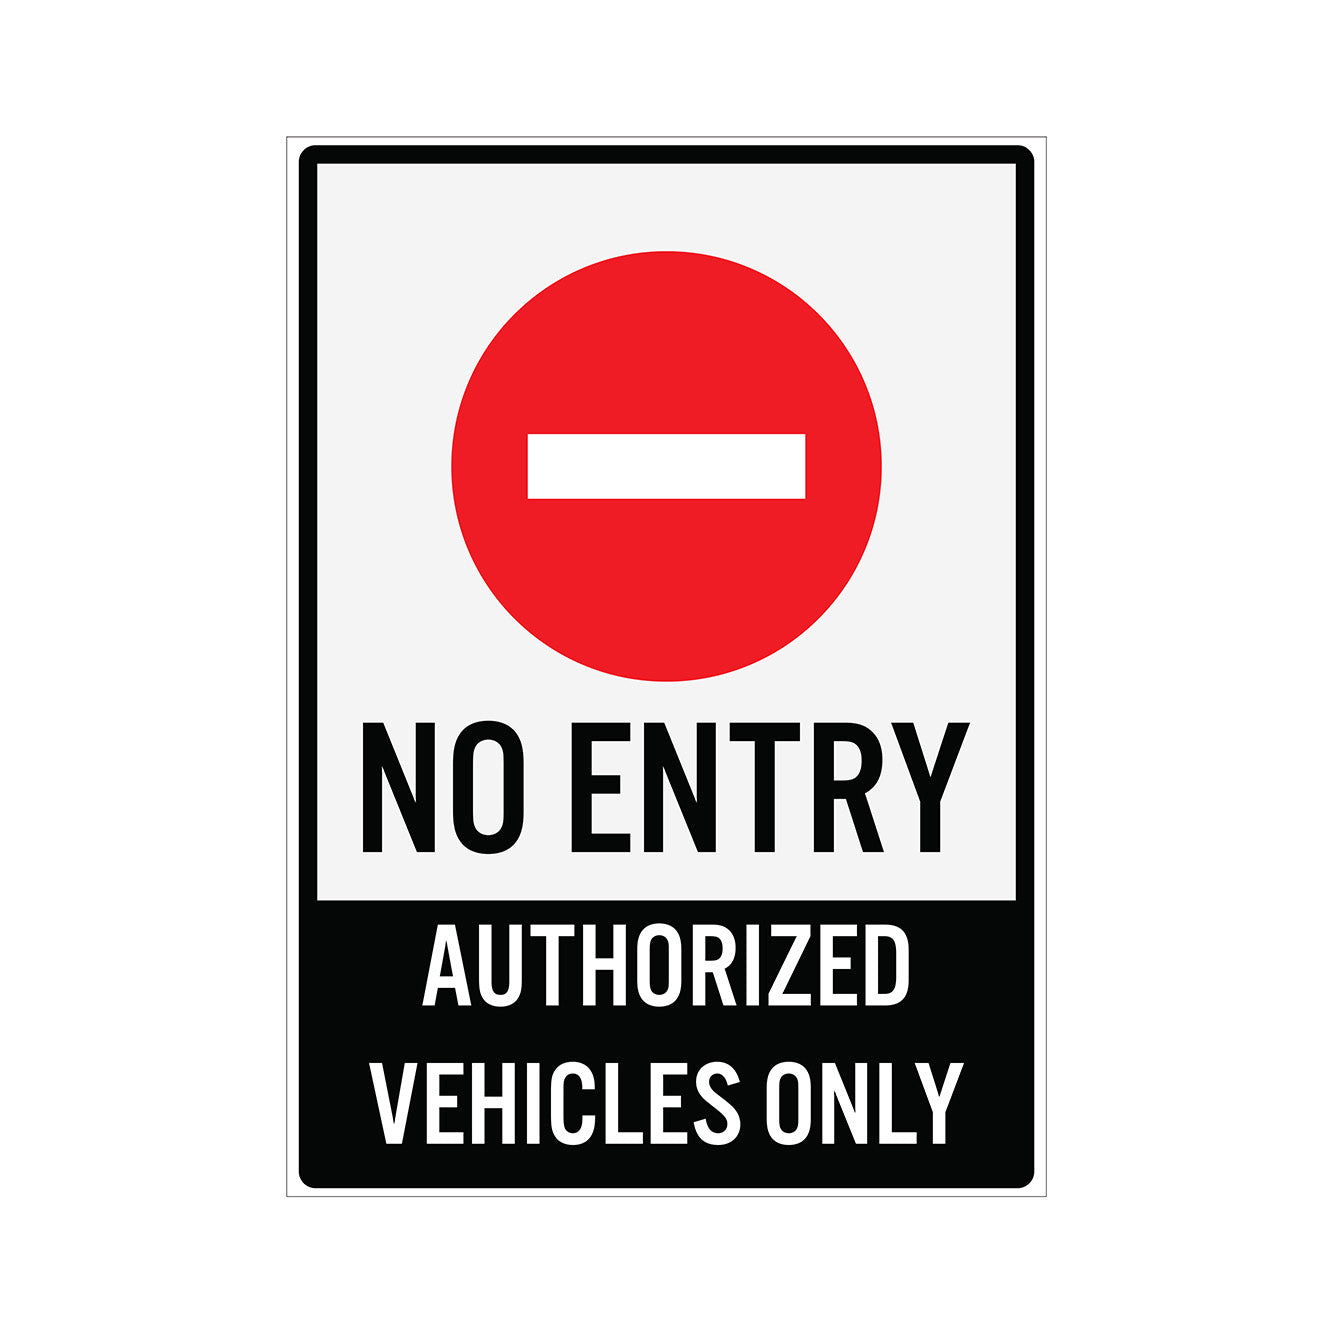 NO ENTRY - AUTHORISED VEHICLES ONLY SIGN